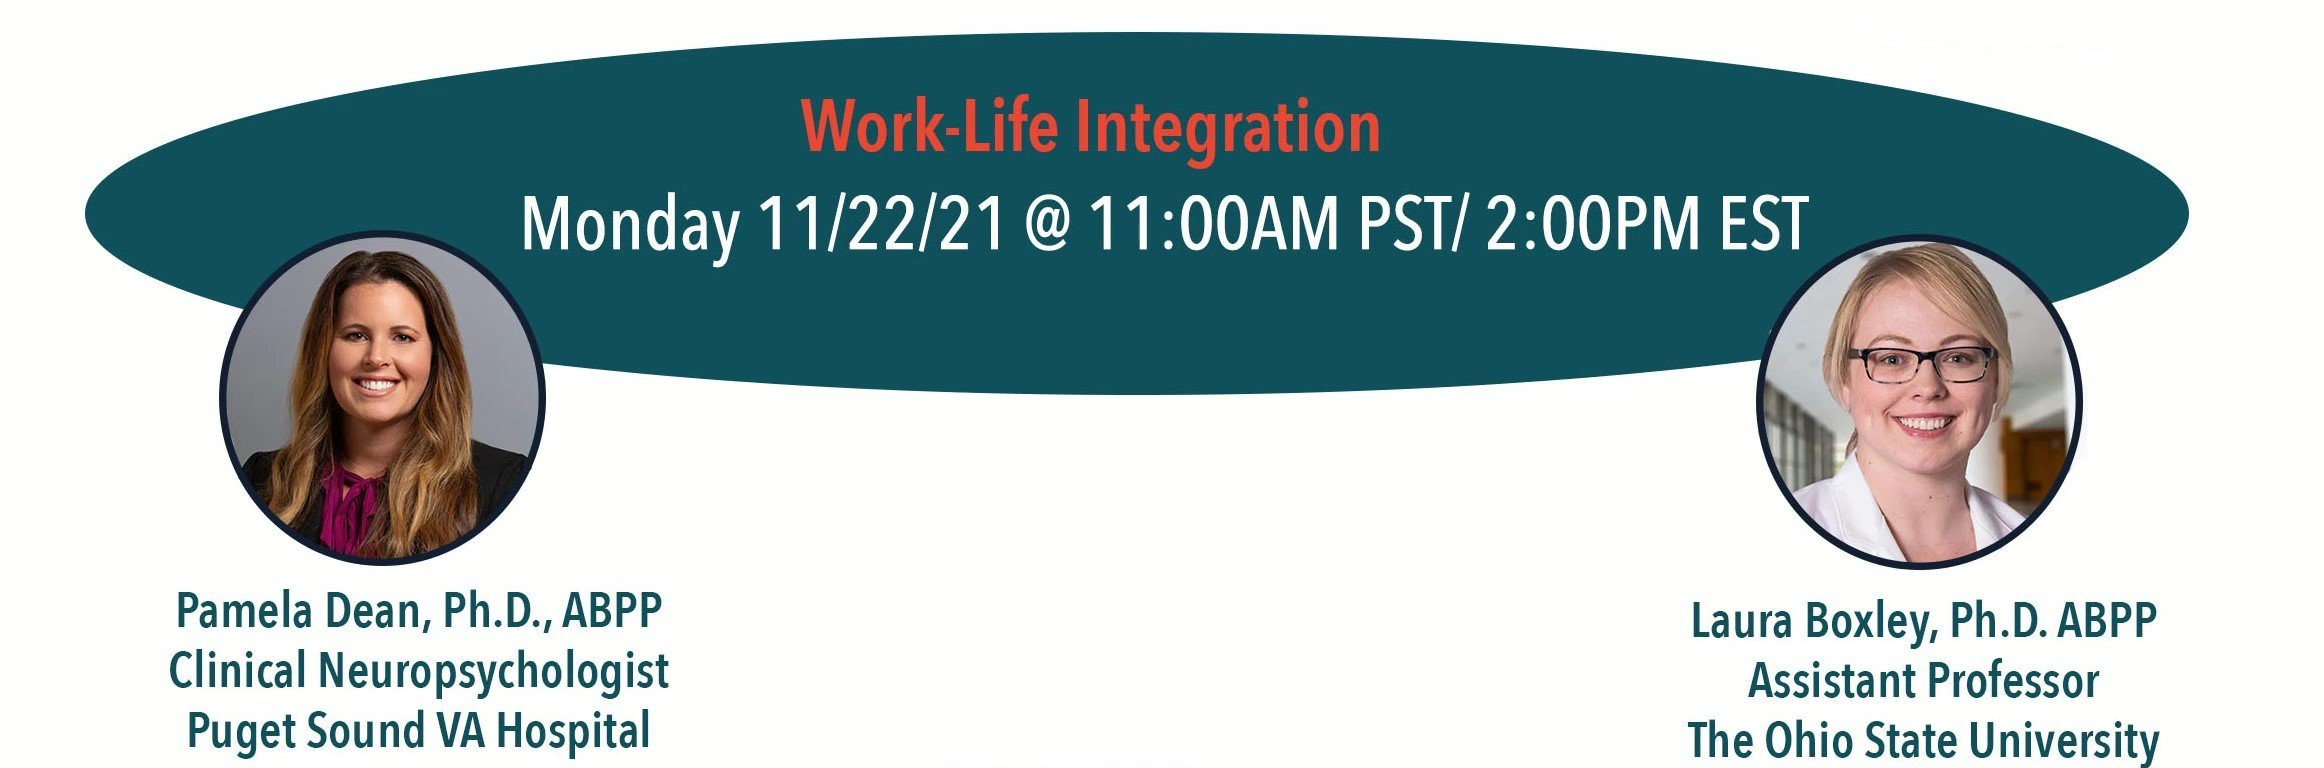 Work life integration with Dr. Laura Boxley and Dr. Pamela Dean